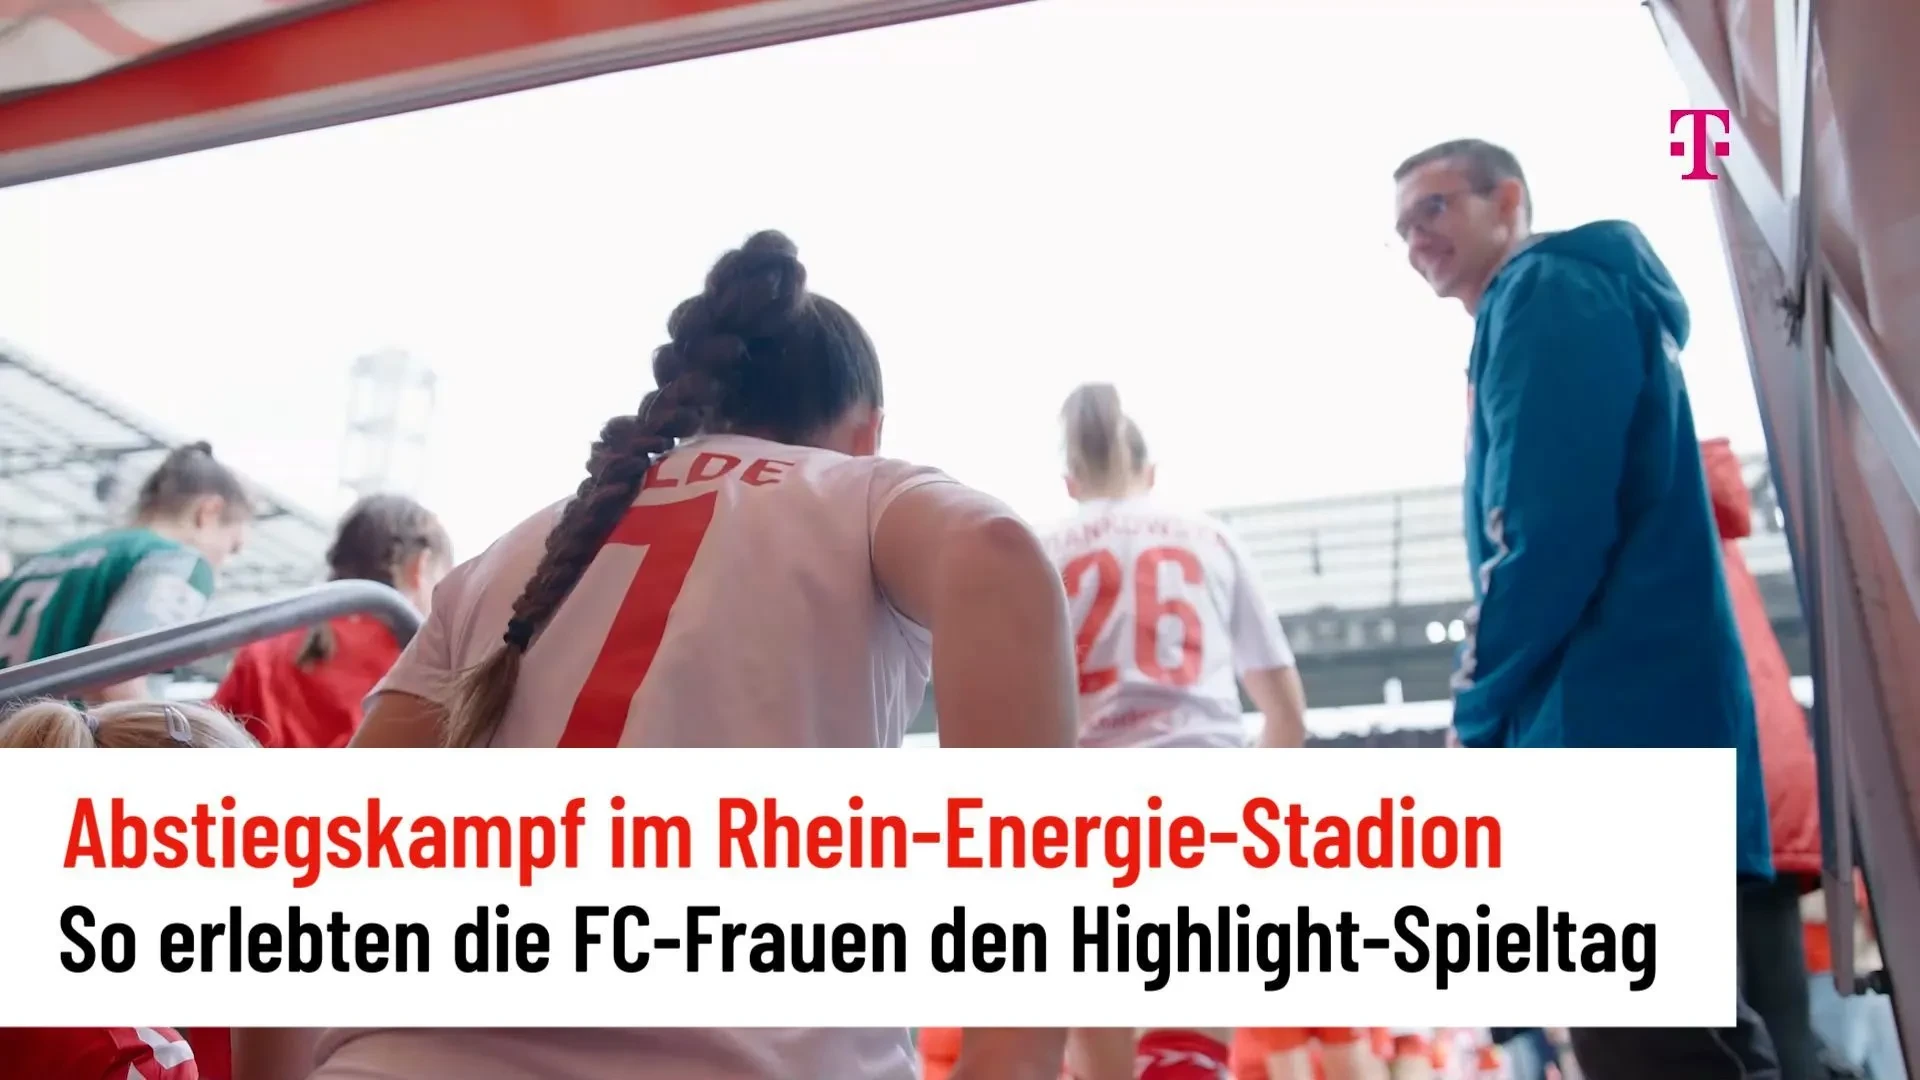 How the FC women experienced the matchday at the Rhein-Energie-Stadion